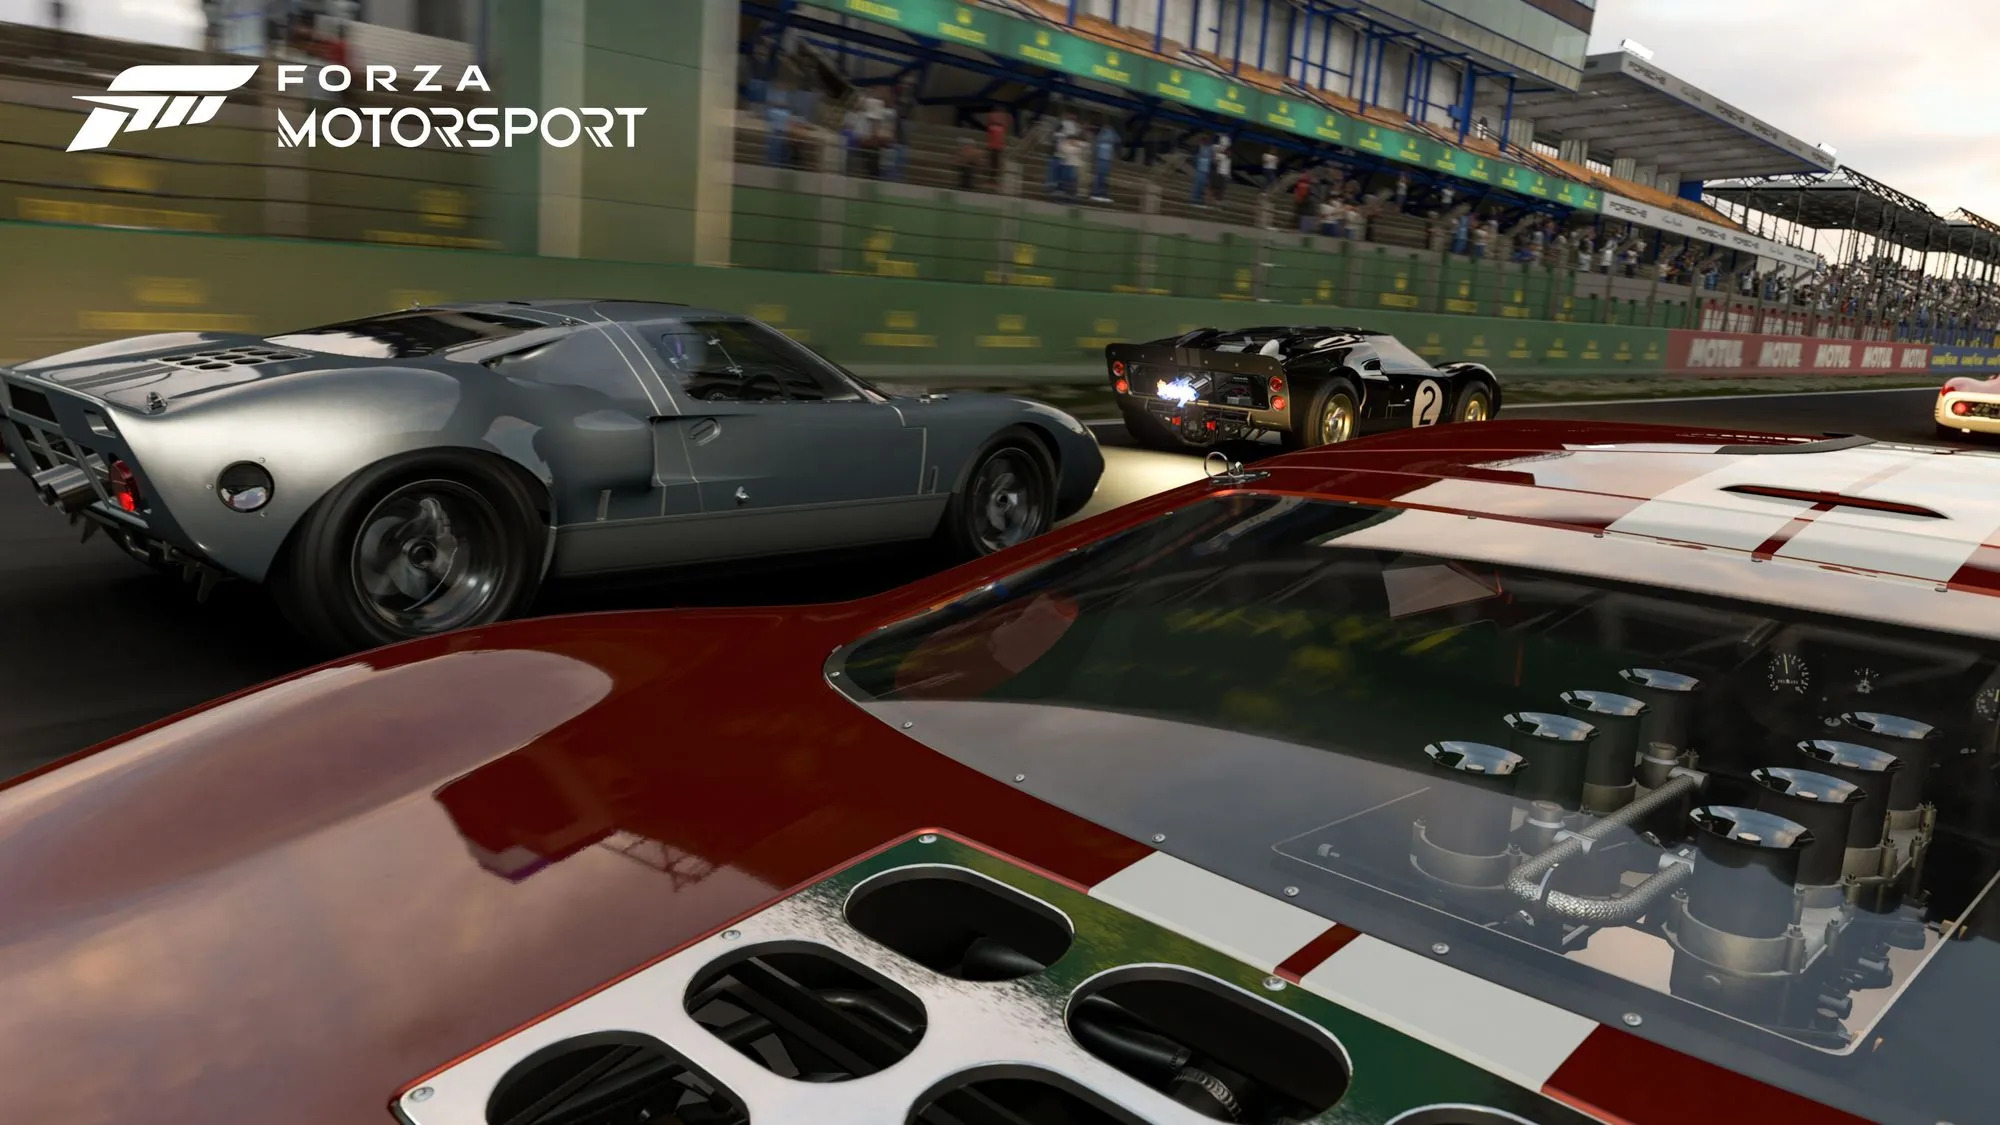 Forza Motorsport finally has a release date, and it's in October